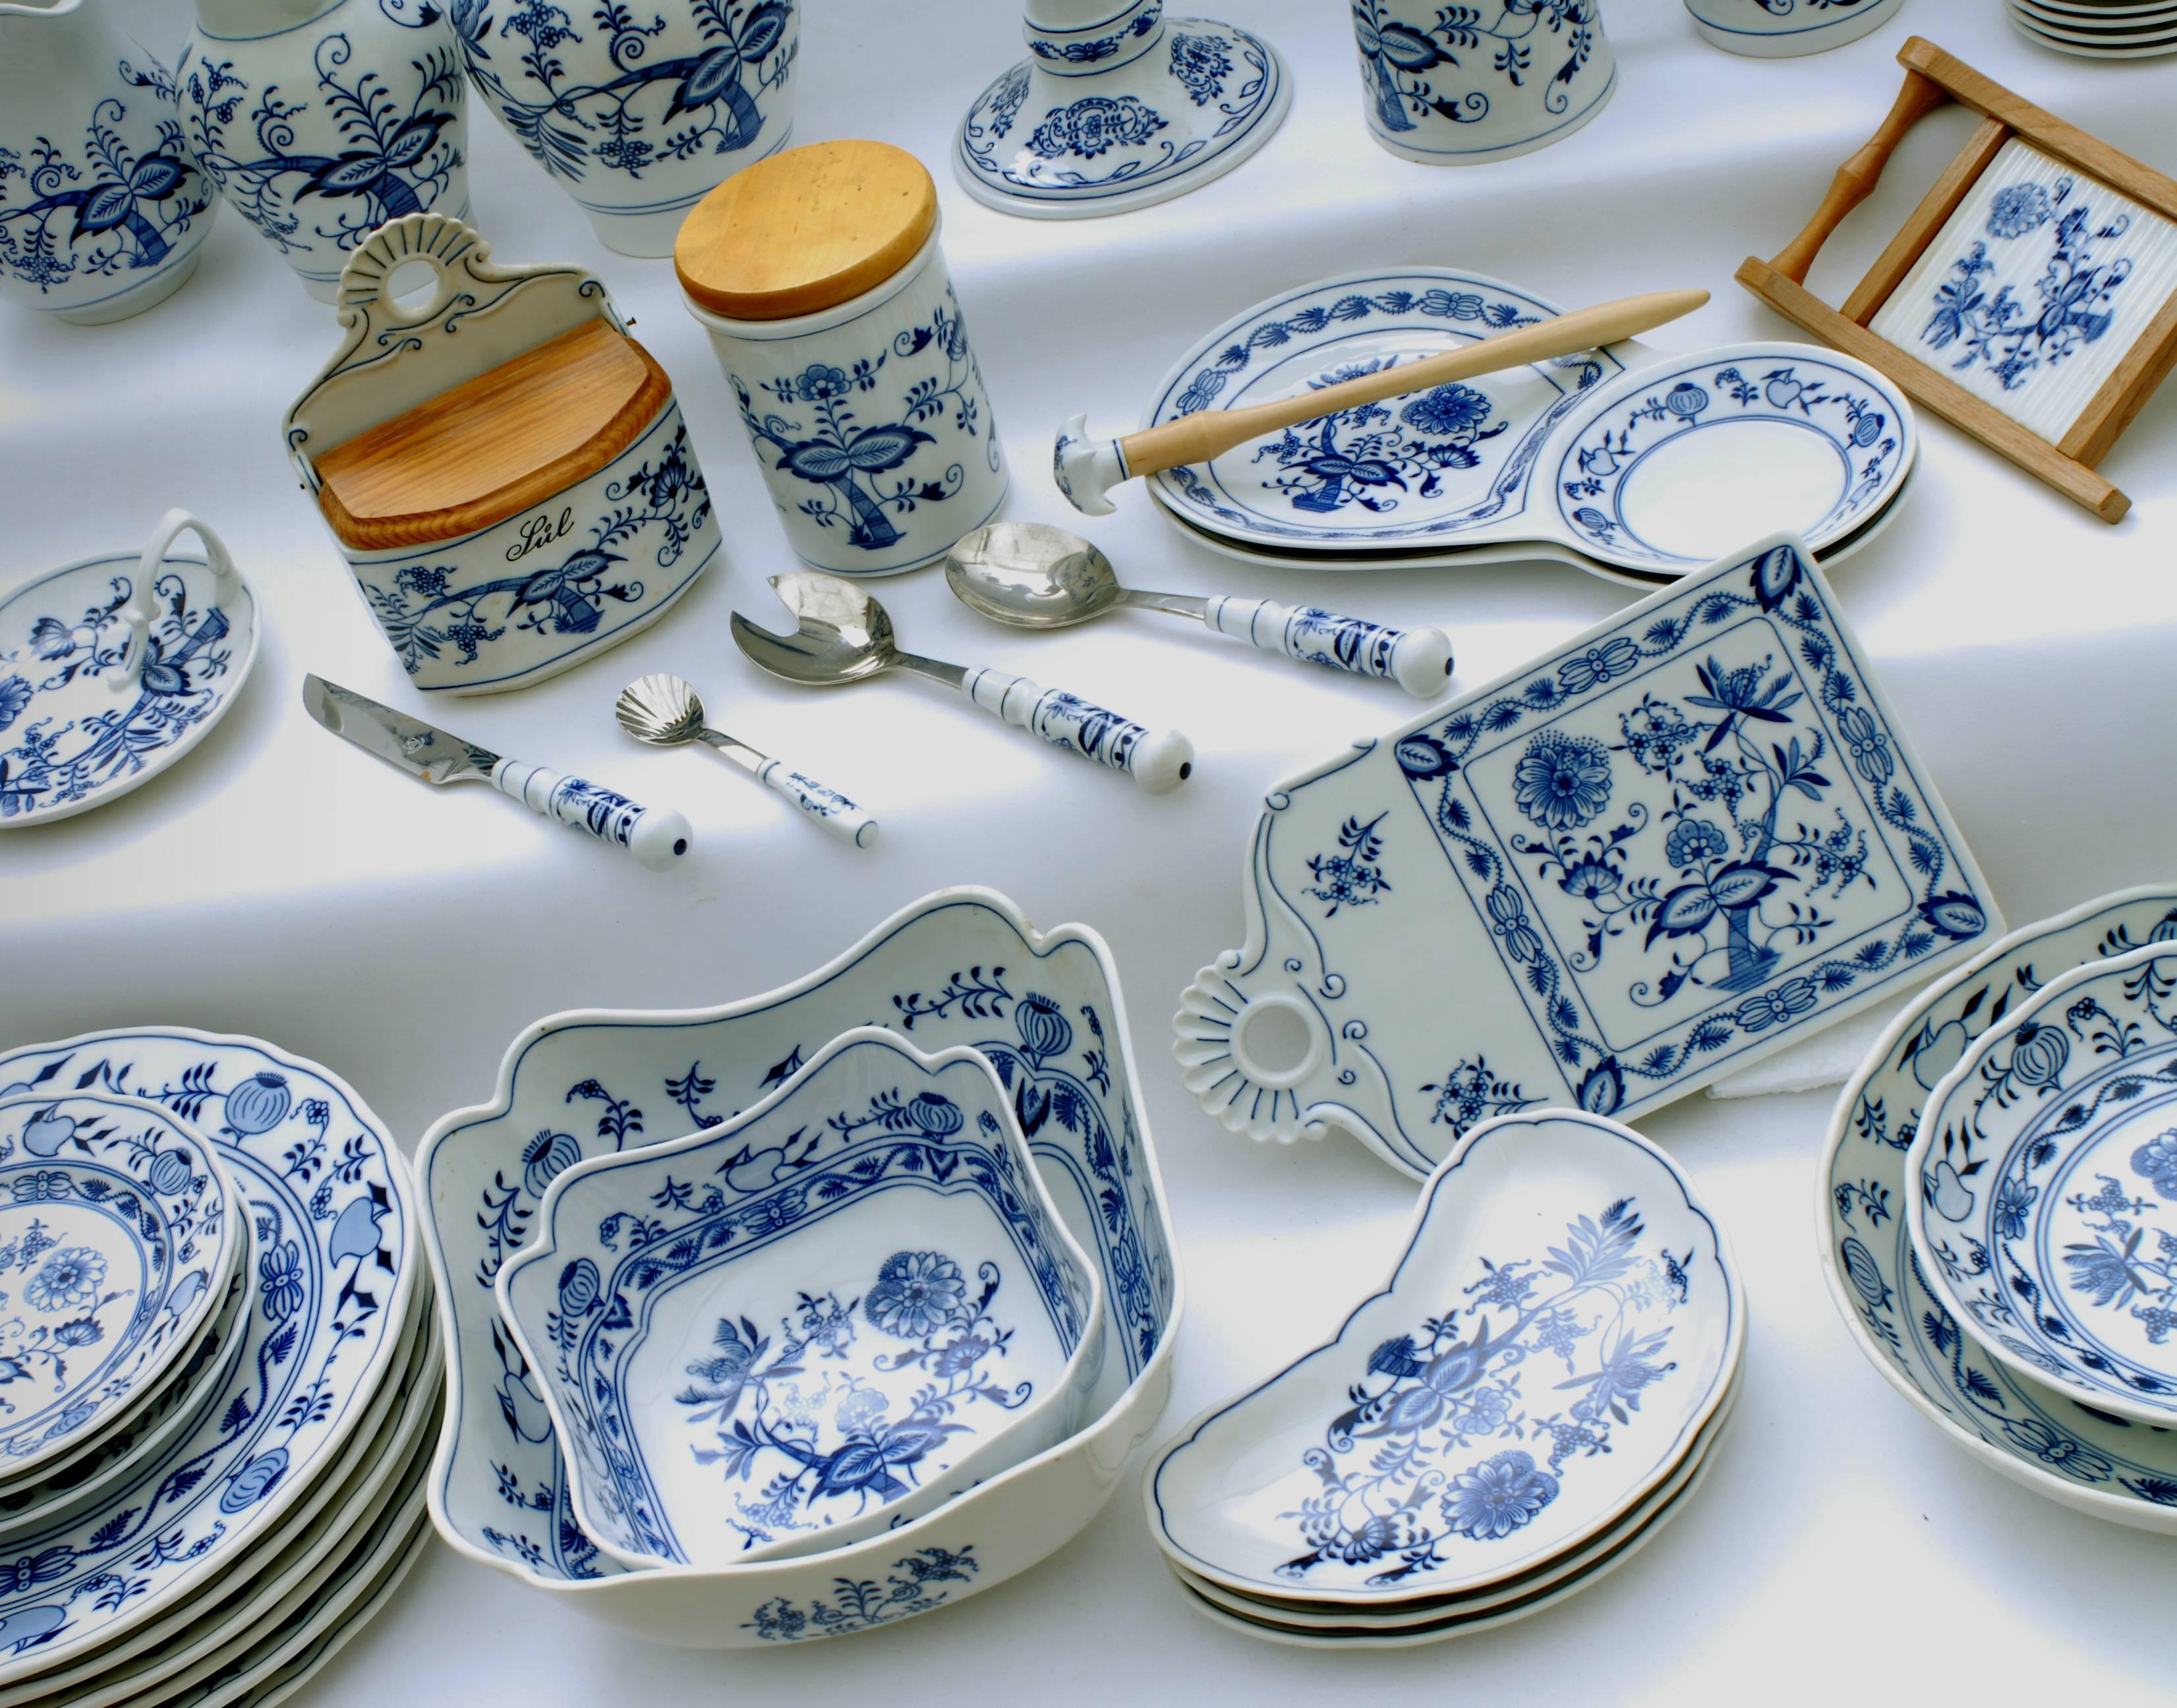 20th Century Exceptional 305 Pieces Meissen and Bohemia Zwiebelmuster Porcelain Set 1885-1992